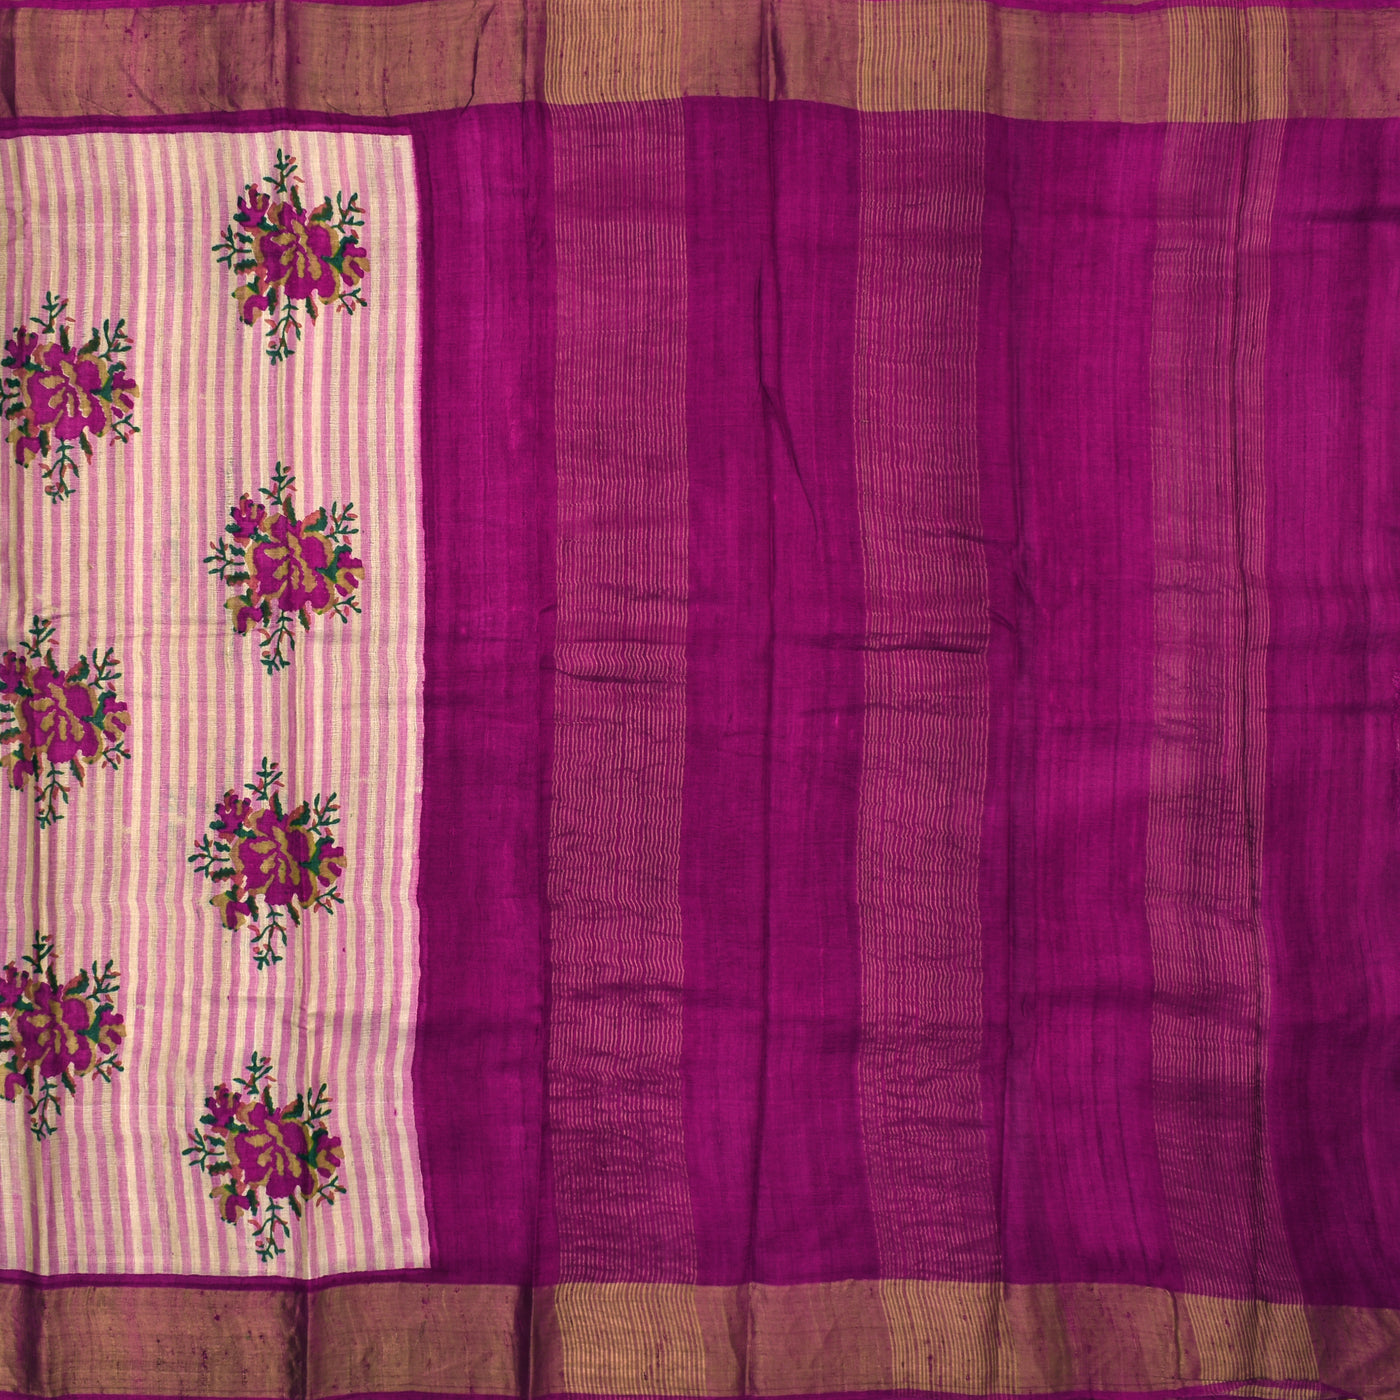 Off White Tussar Silk Saree with Stripes and Floral Printed Design